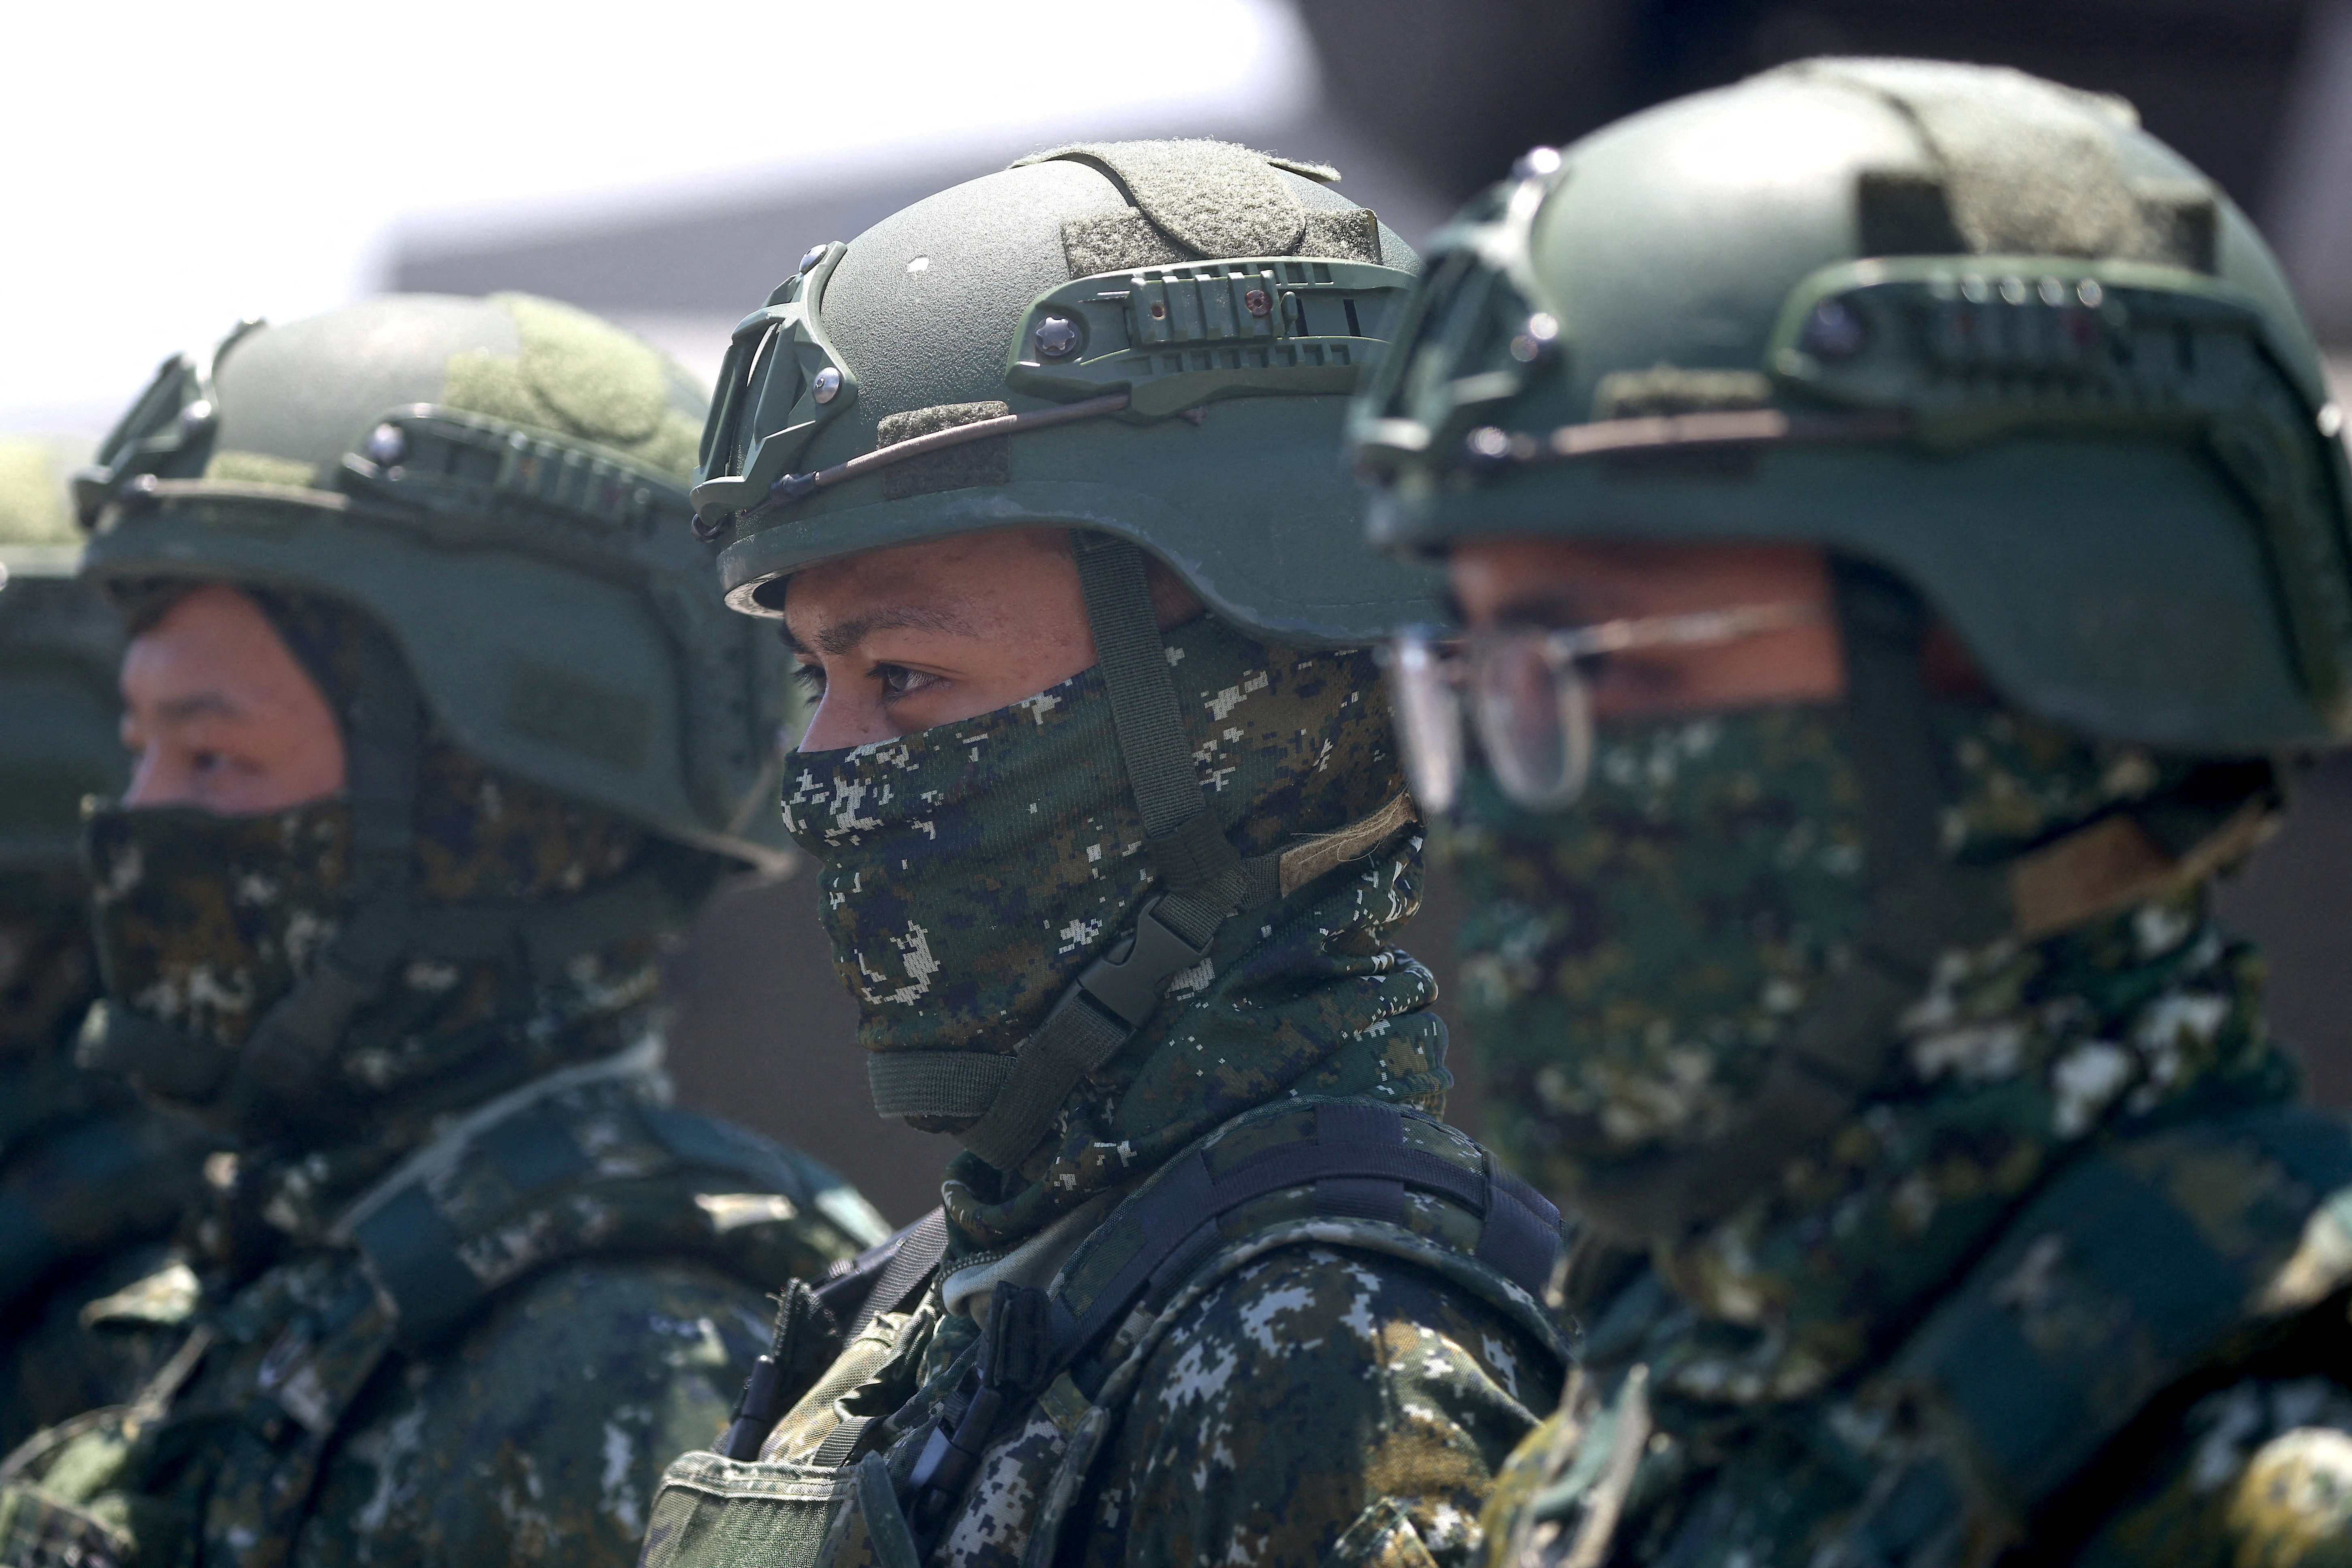 Soldiers stand guard at an airbase in Hualien